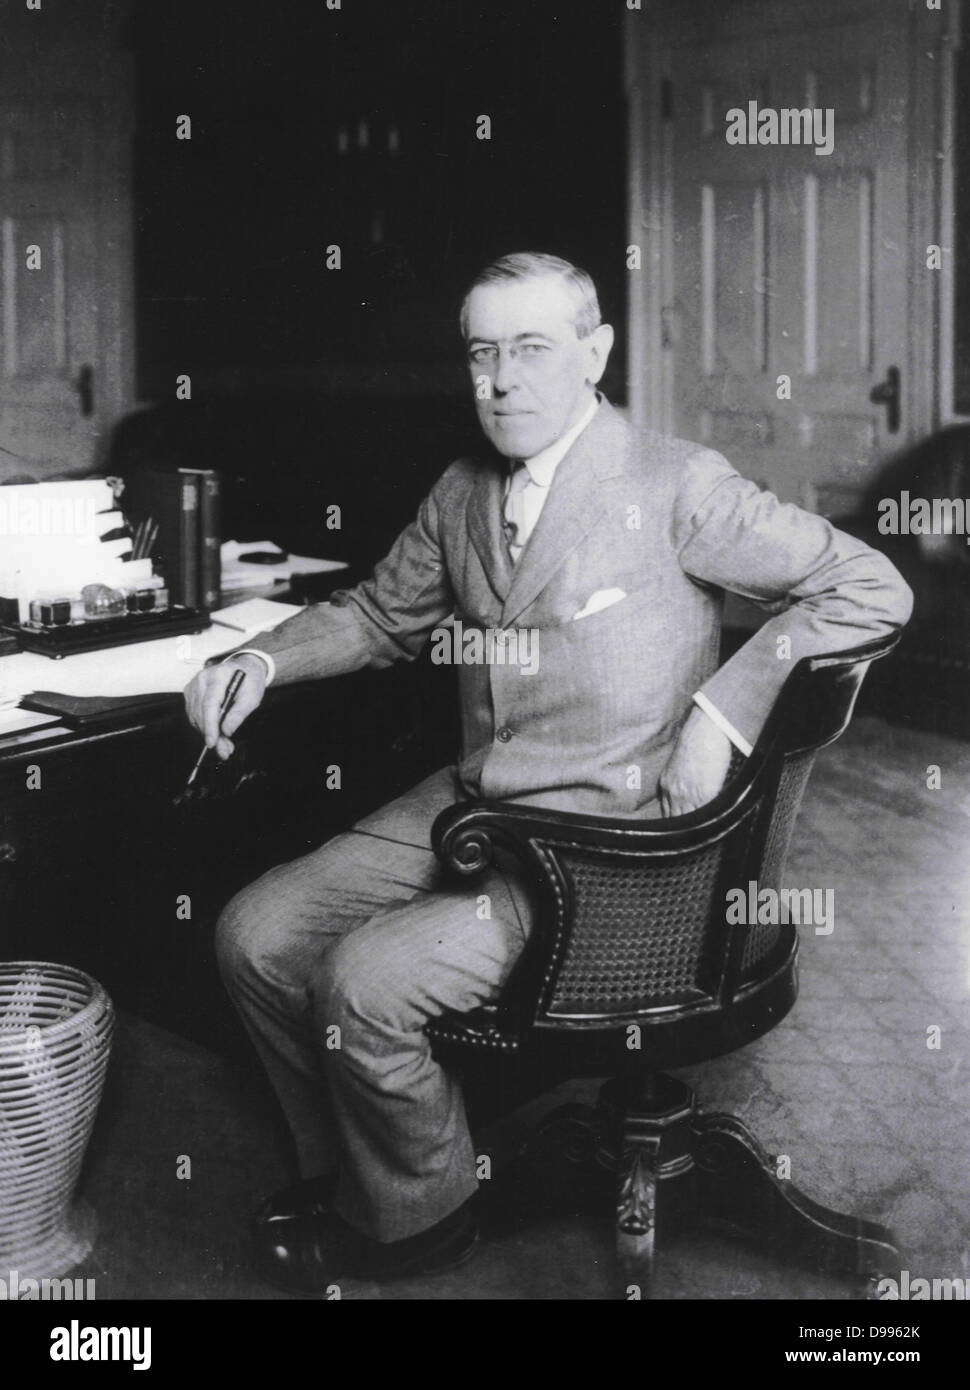 Thomas Woodrow Wilson (December 28, 1856 – February 3, 1924) was the 28th President of the United States 1913-1921. Stock Photo